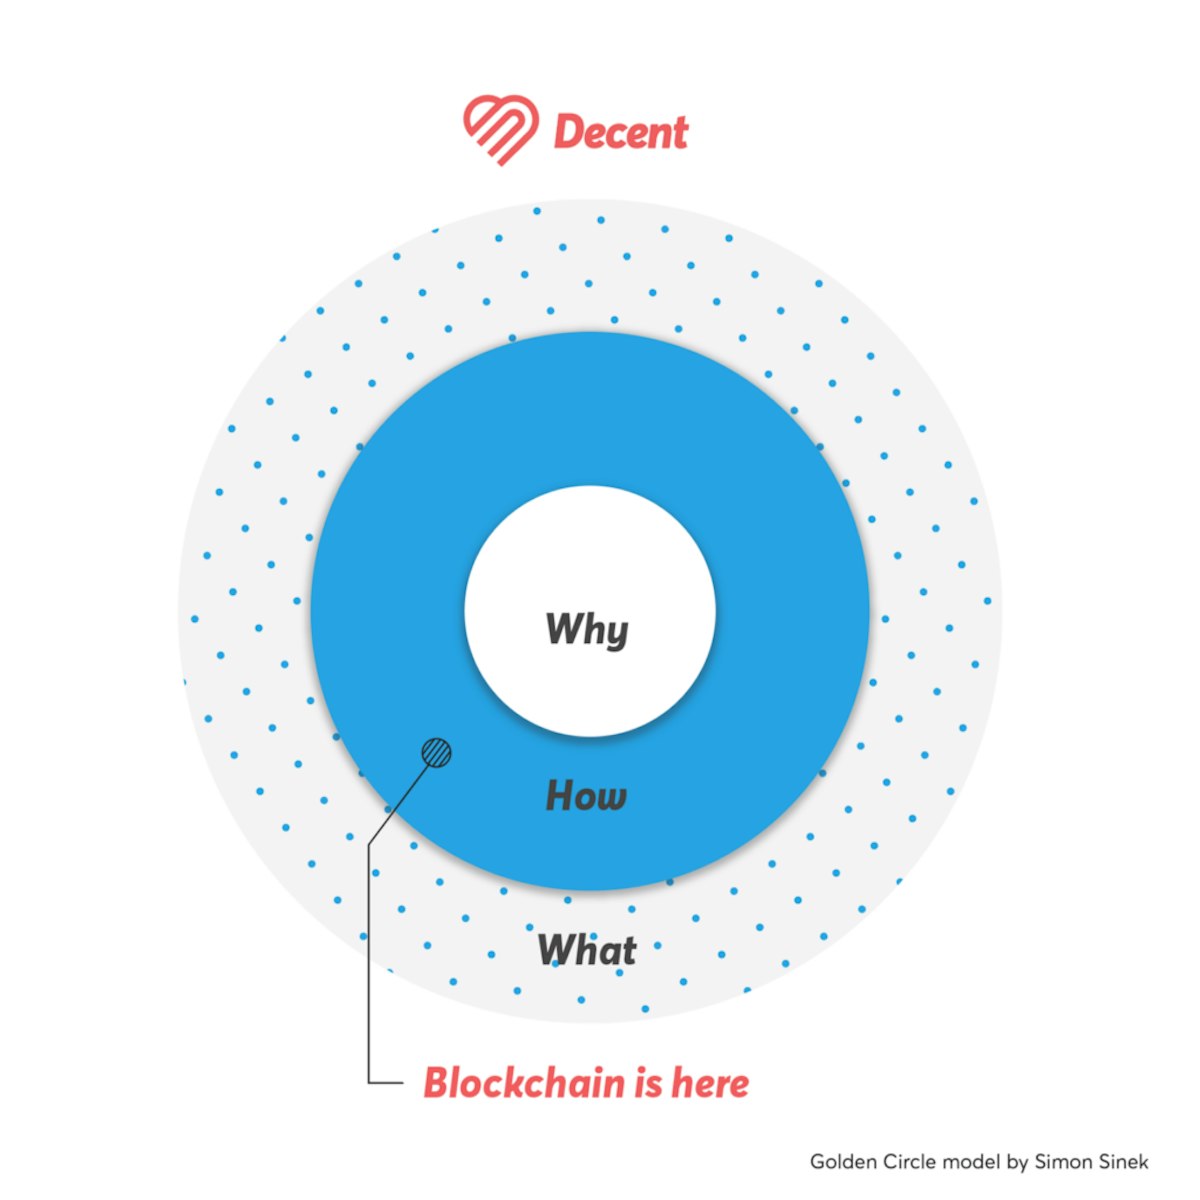 featured image - How will Decent use blockchain?